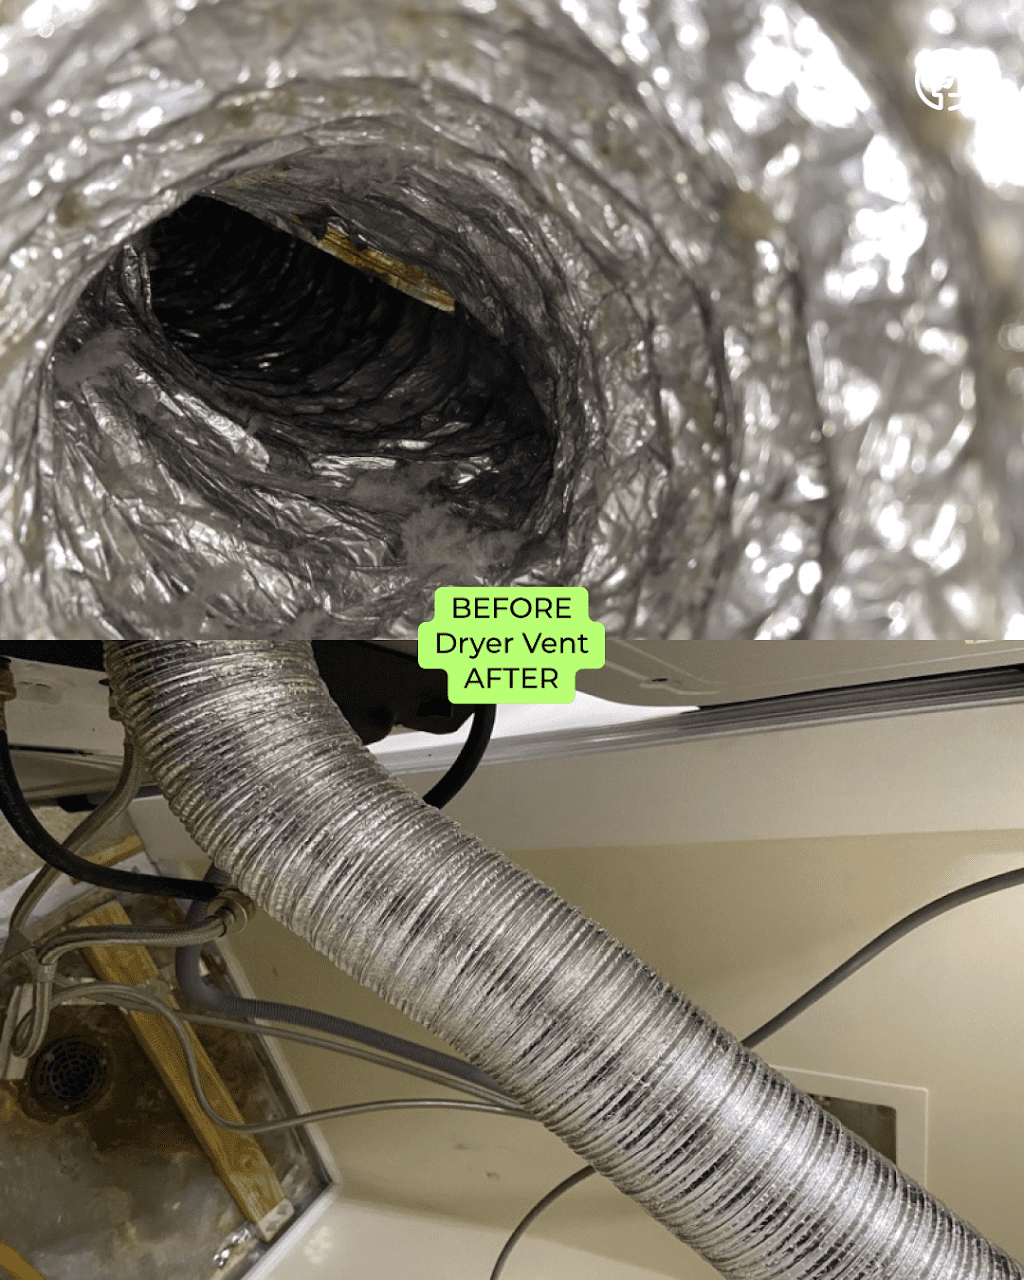 Green Ductors Air Duct & Dryer Vent Cleaning | 434 W 33rd St 7th Floor, New York, NY 10001 | Phone: (888) 307-0898